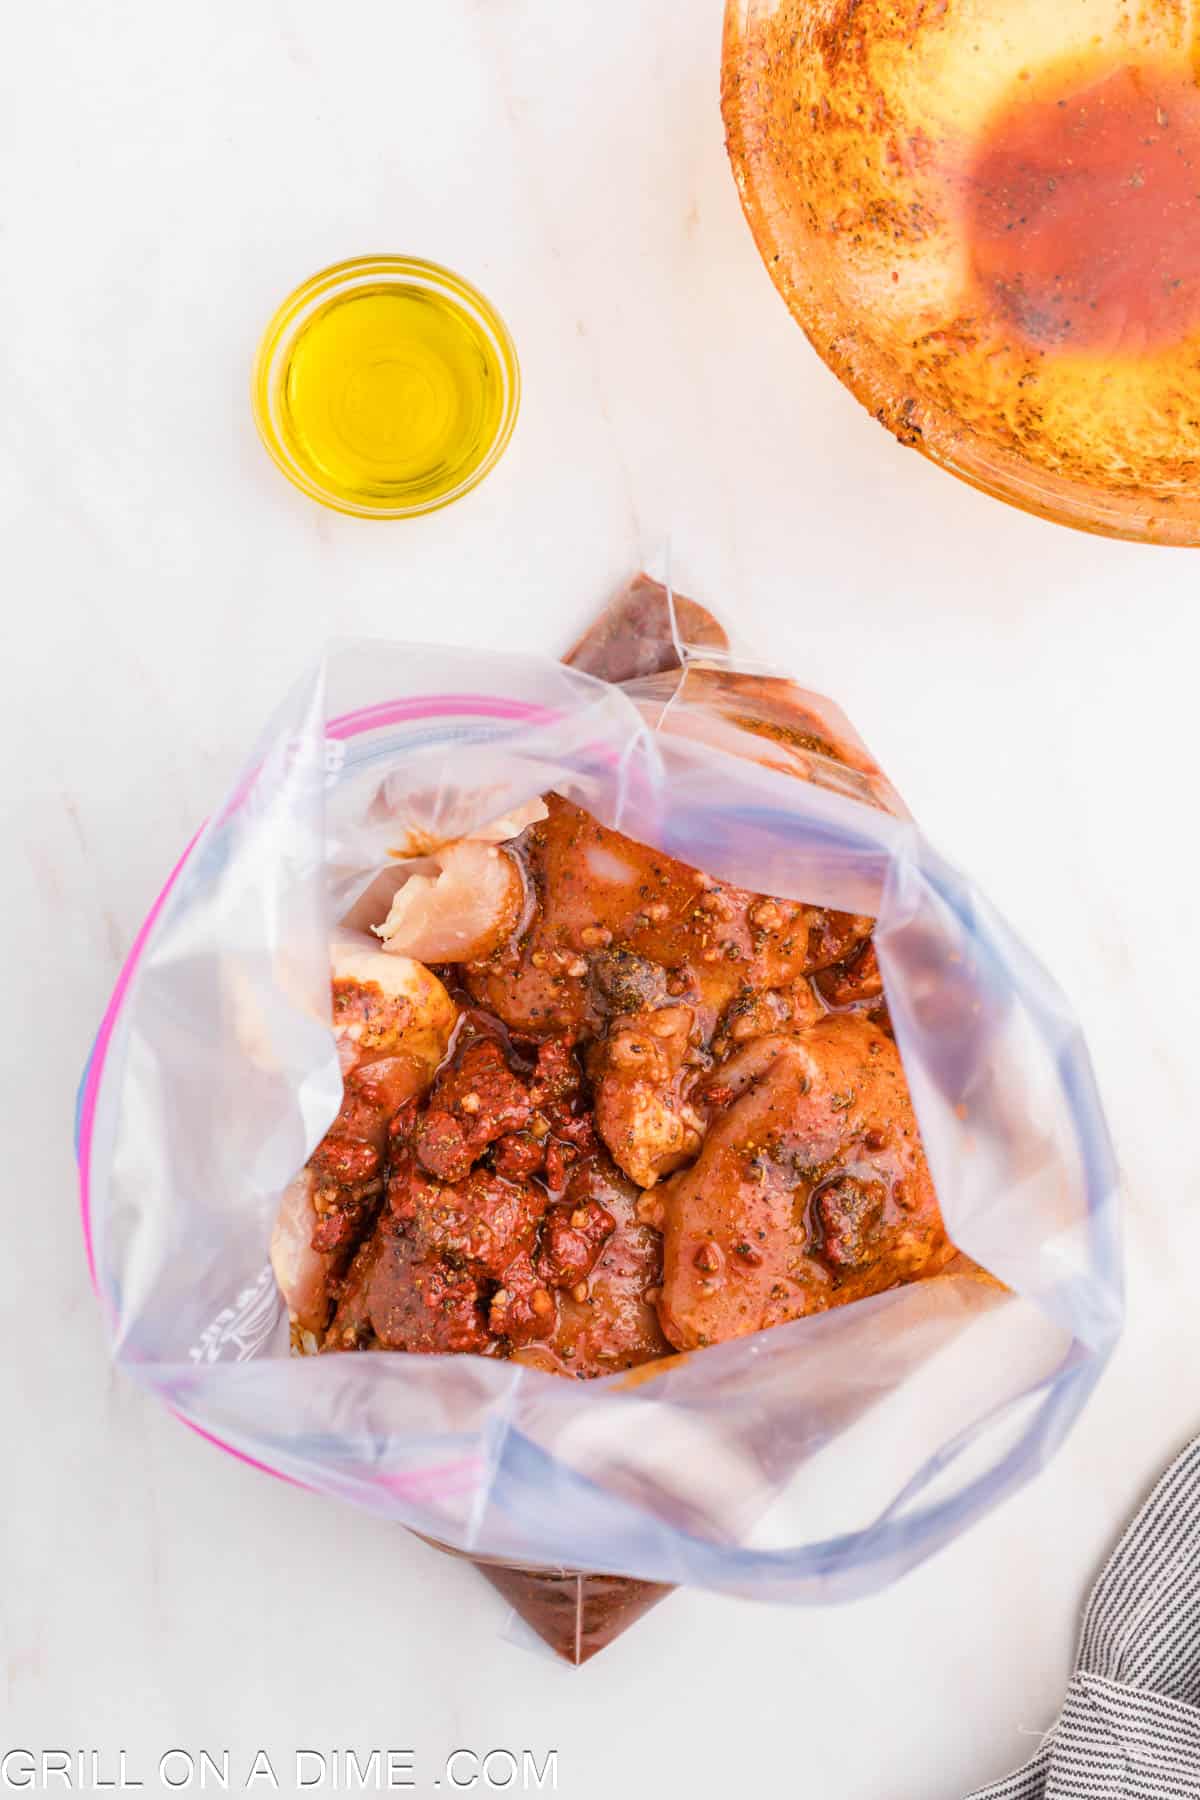 Placing the chicken and marinade in a zip lock bag